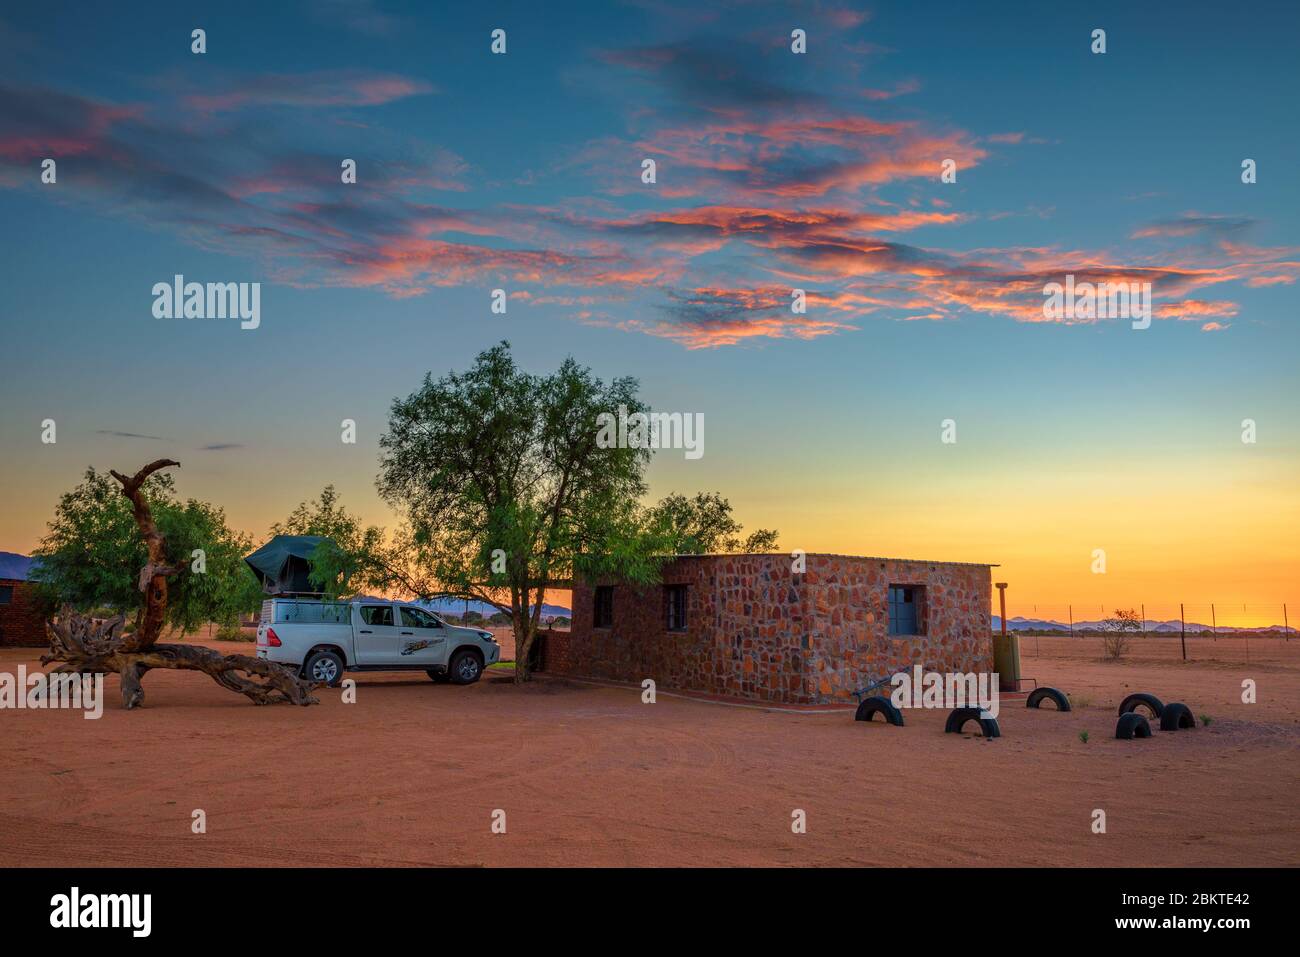 Sunset at a desert camp in Namibia with a pickup 4x4 car with a roof tent Stock Photo